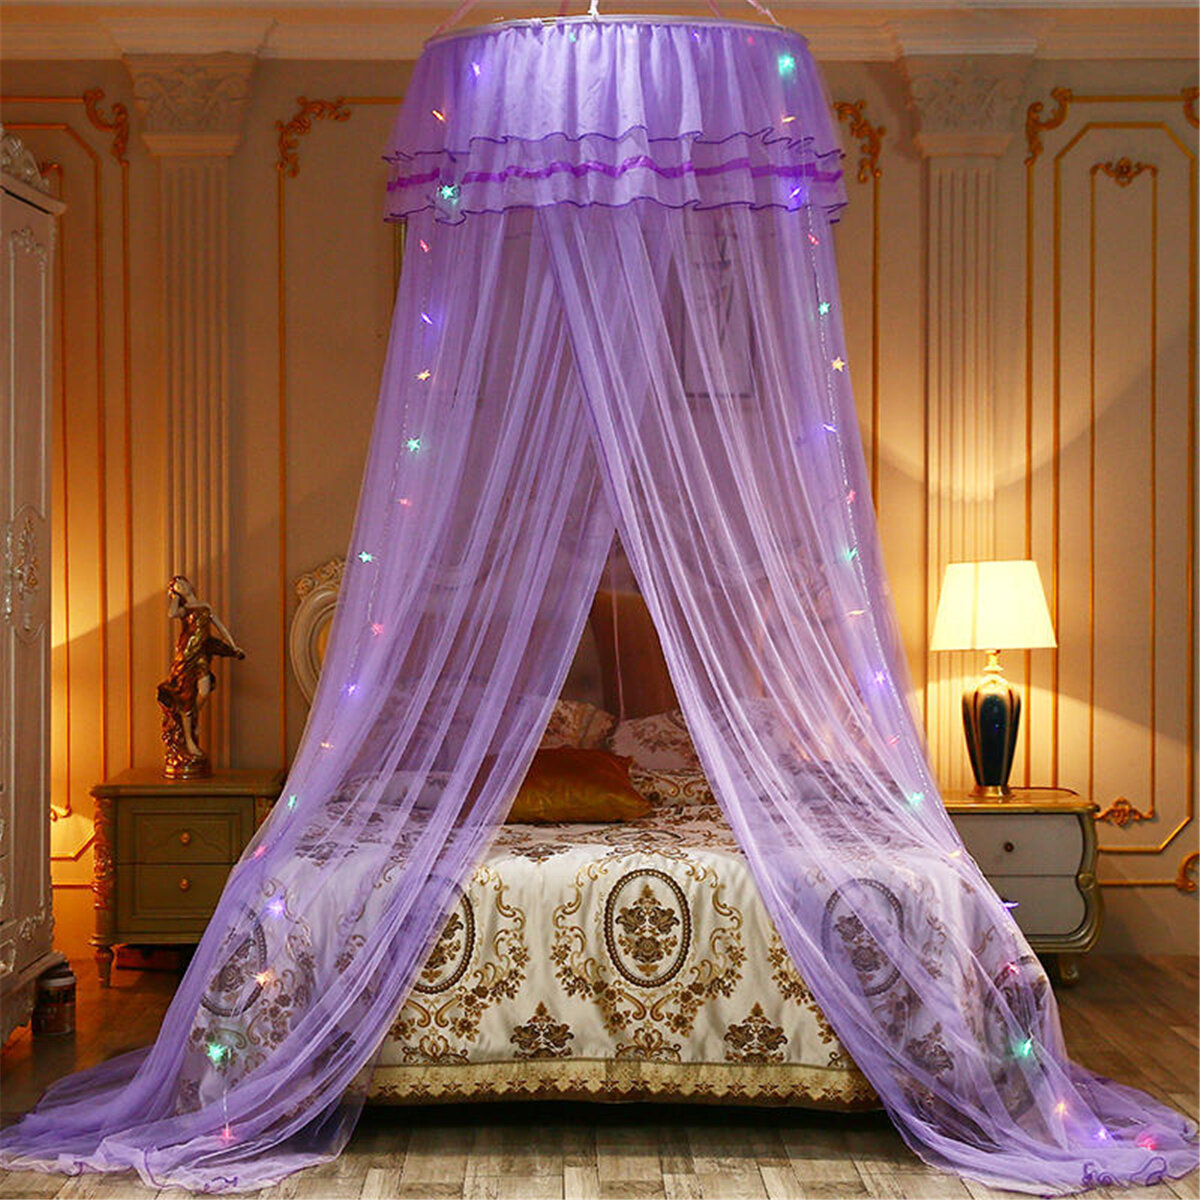 

Ceiling-Mounted Mosquito Net Free Installation Home Dome Foldable Bed Canopy with LED String Light